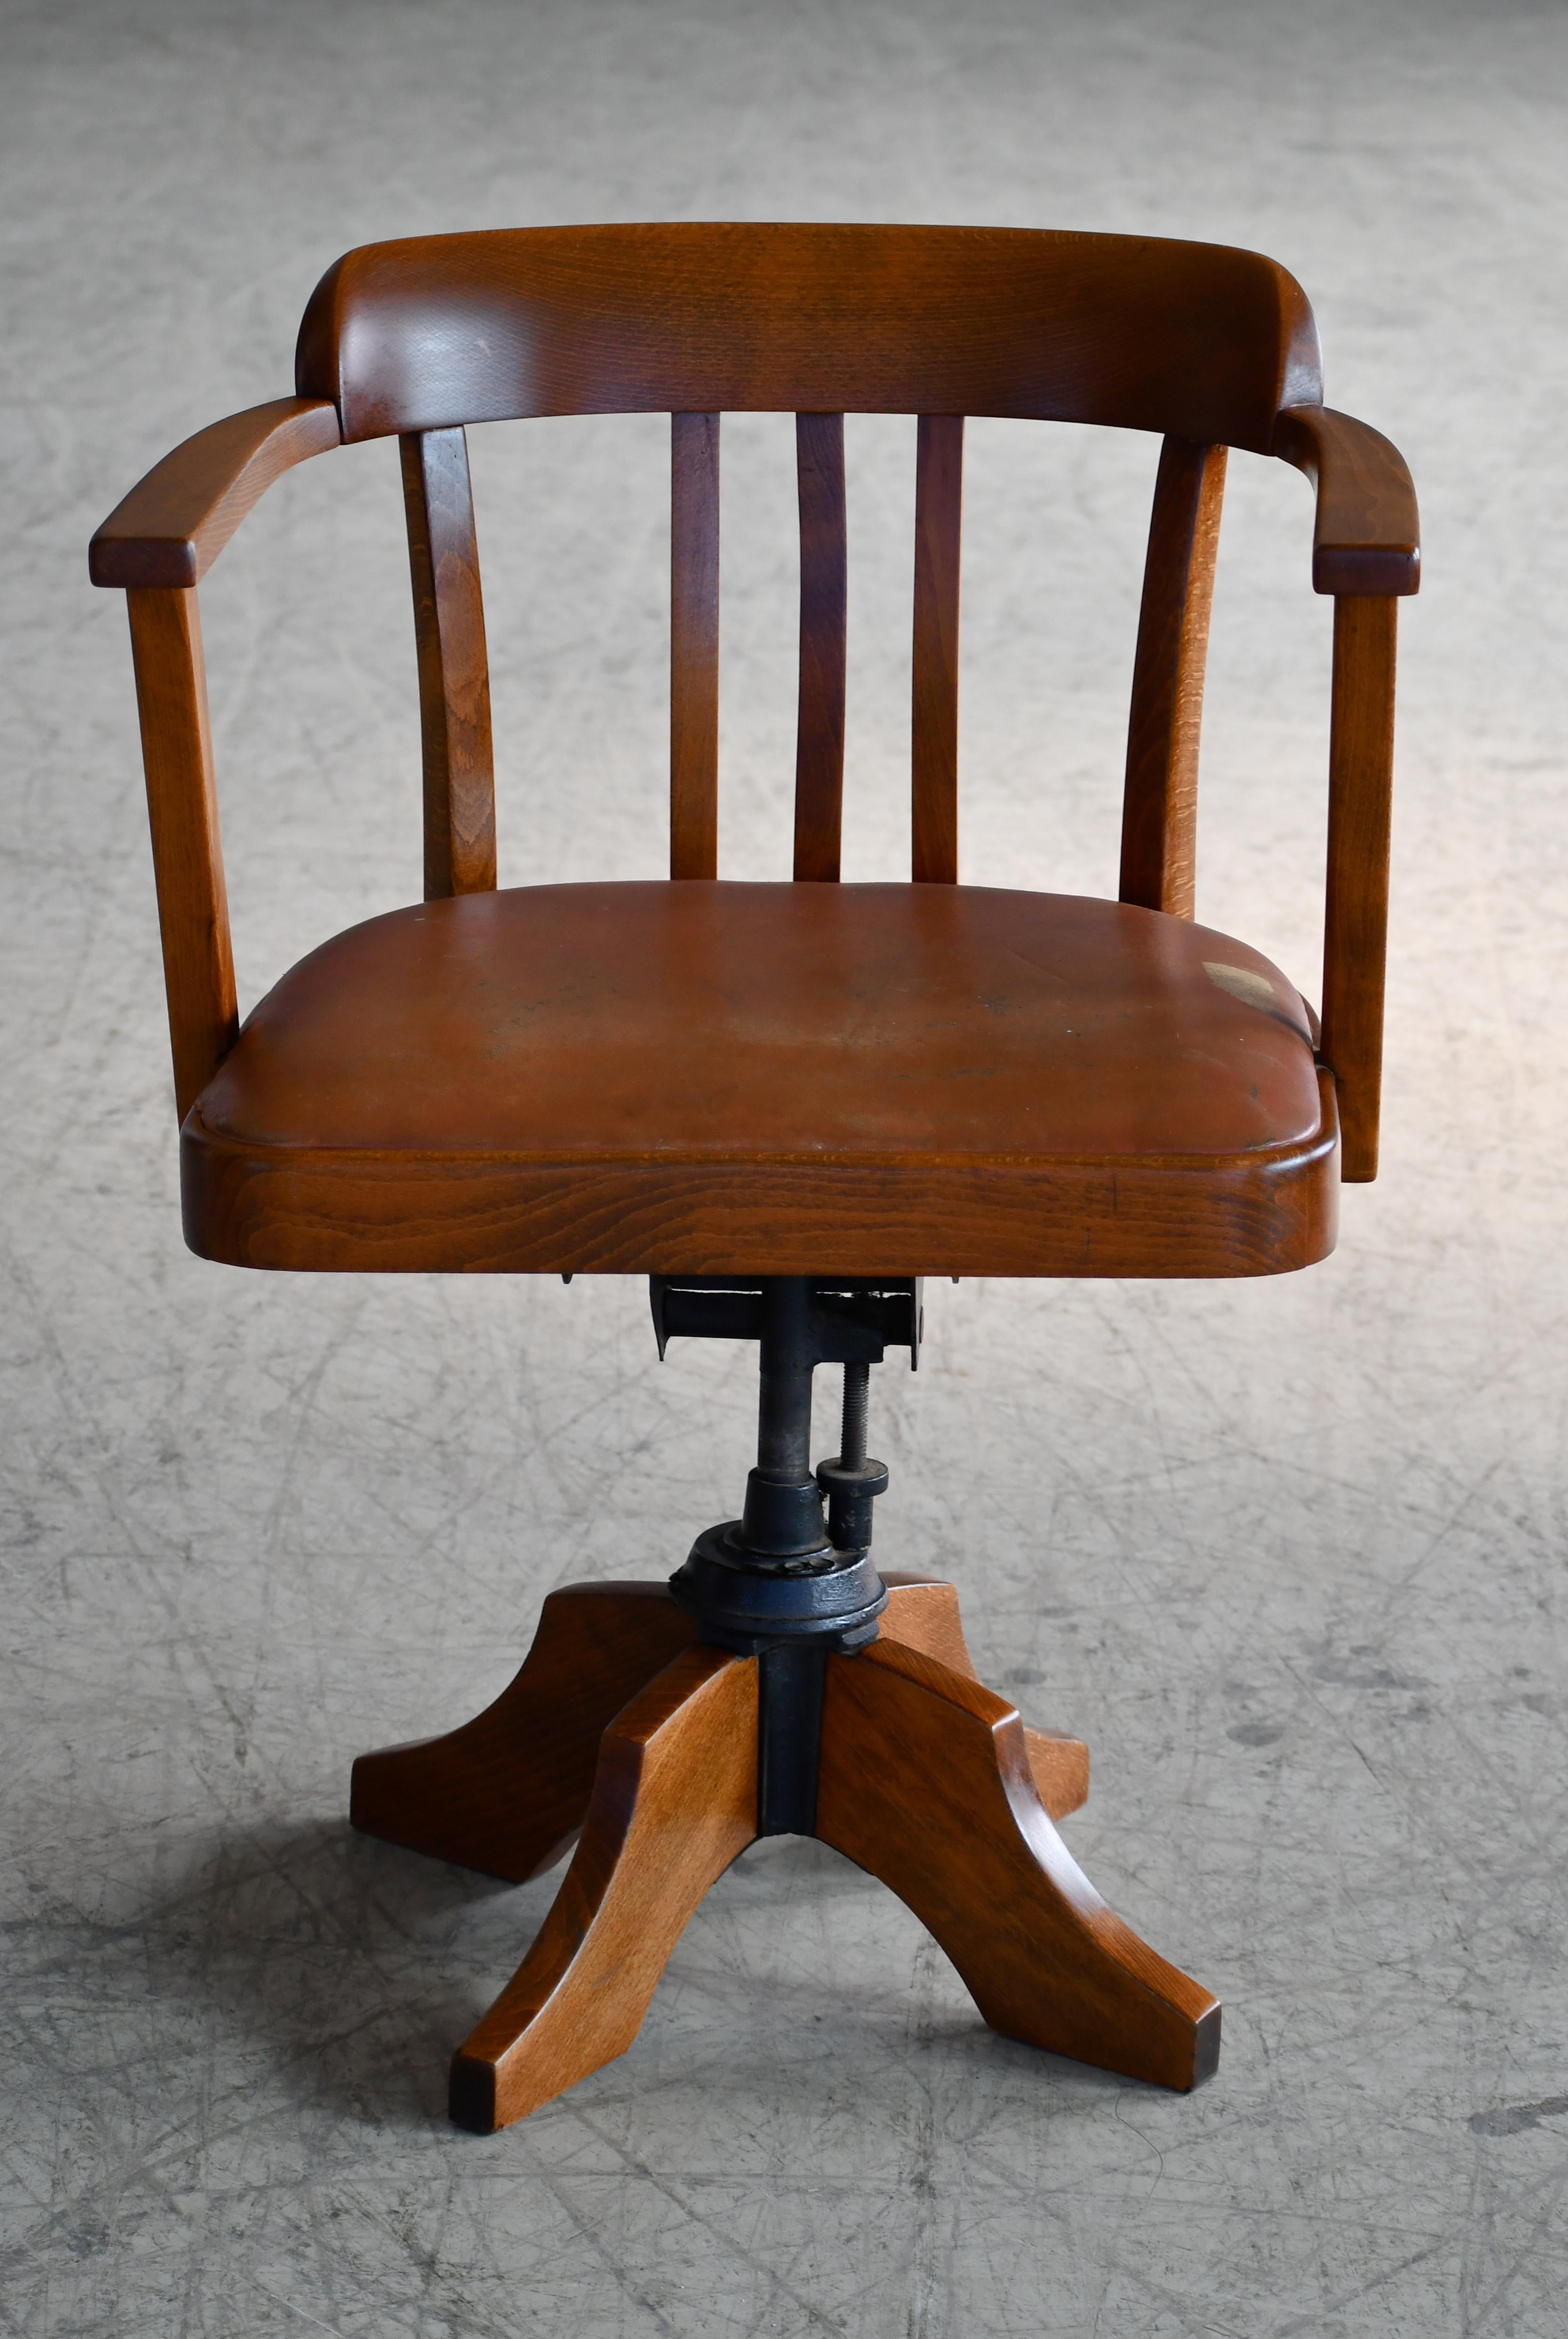 1920's swivel desk chair in leather and solid oak. It is rare to find these very cool and solid chairs with a leather seat and even more so a leather seat that is still fully intact and in this good condition. The leather seat is showing nice wear